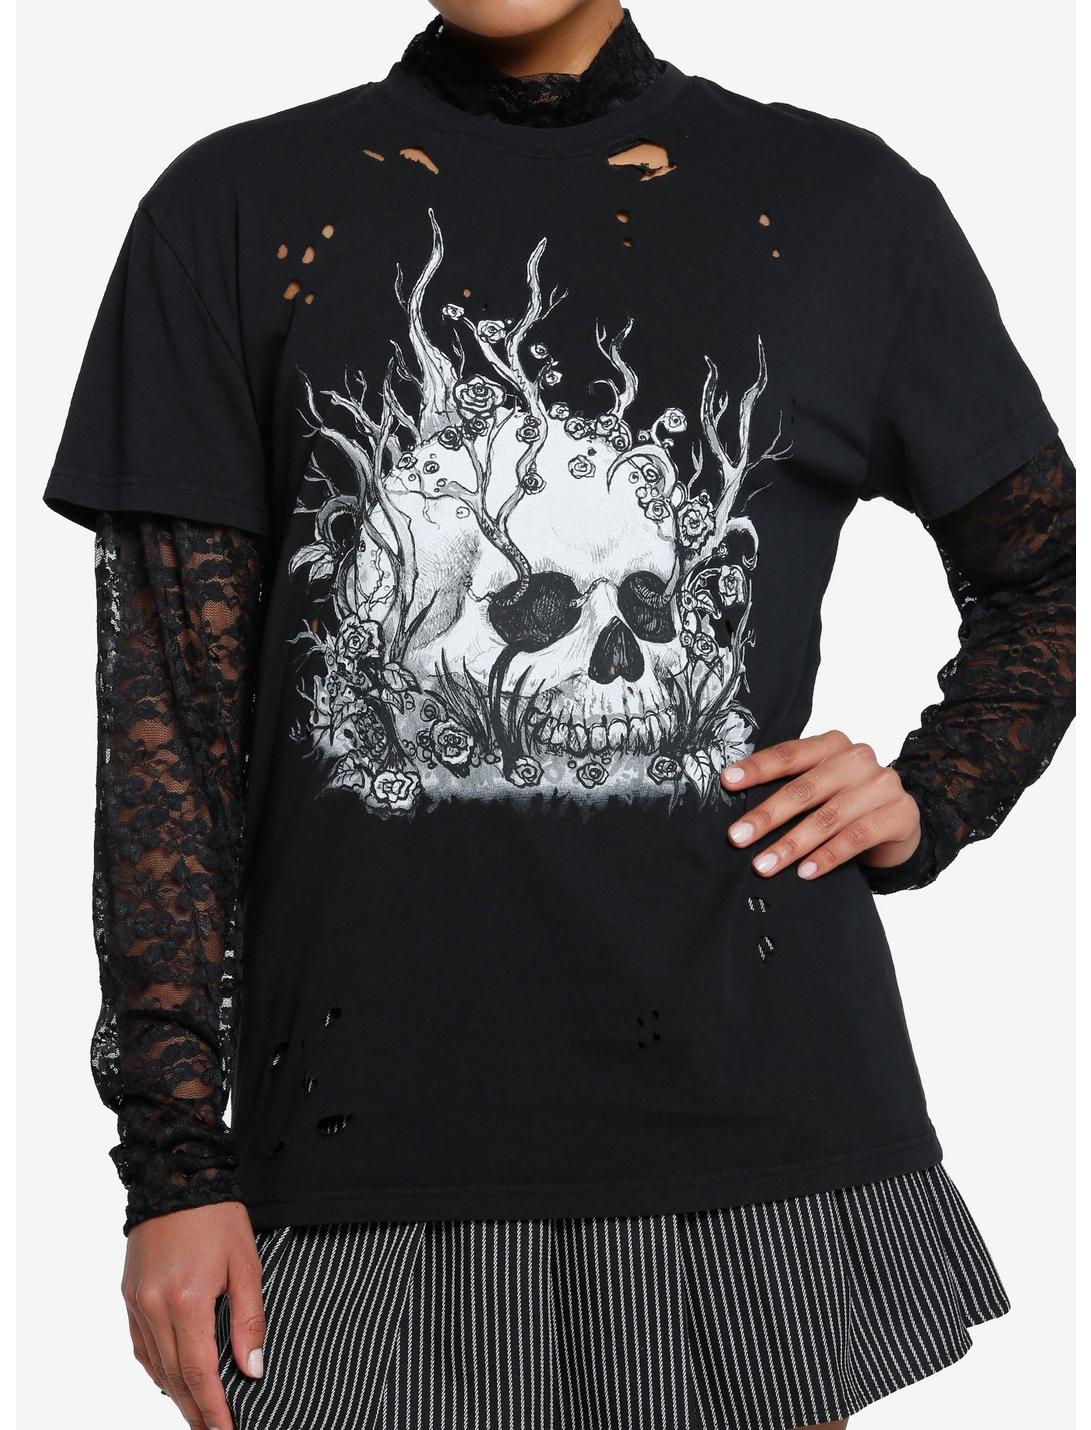 Skull Roots Lace Girls Long-Sleeve Twofer T-Shirt By Ghoulish Bunny Studios, BLACK, hi-res